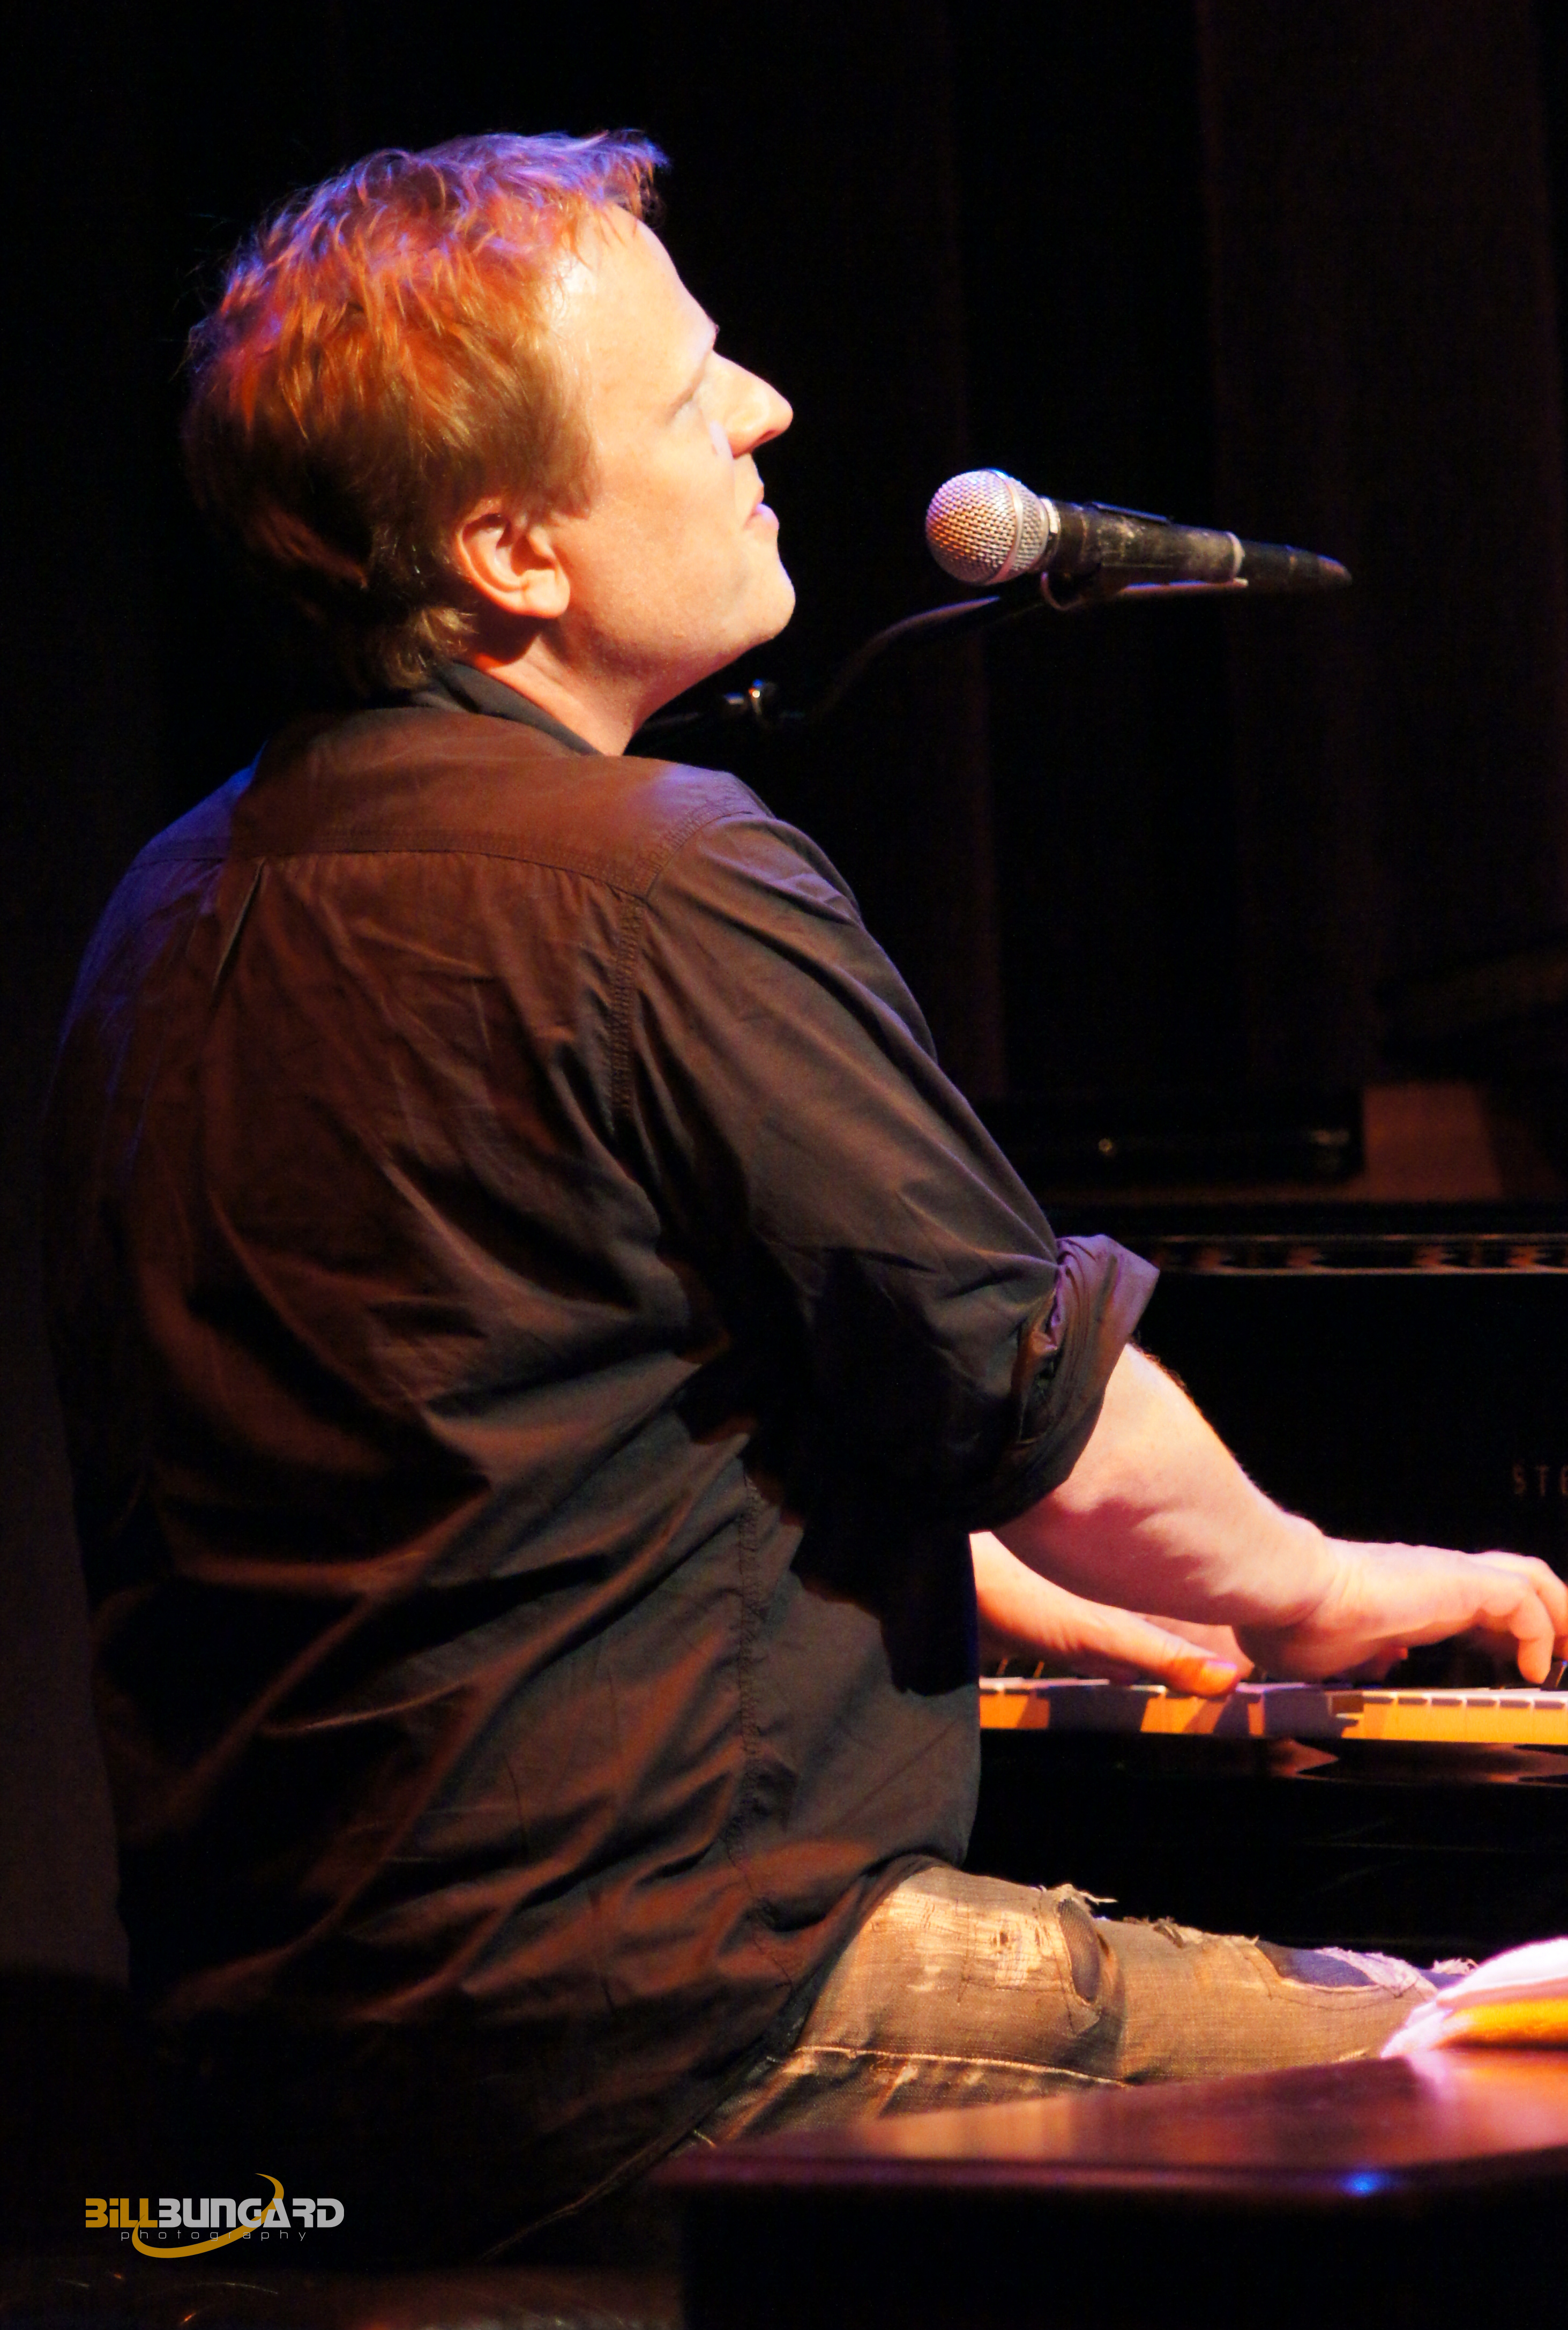 Keith Cotton at Jazz Alley (Photo by Bill Bungard)